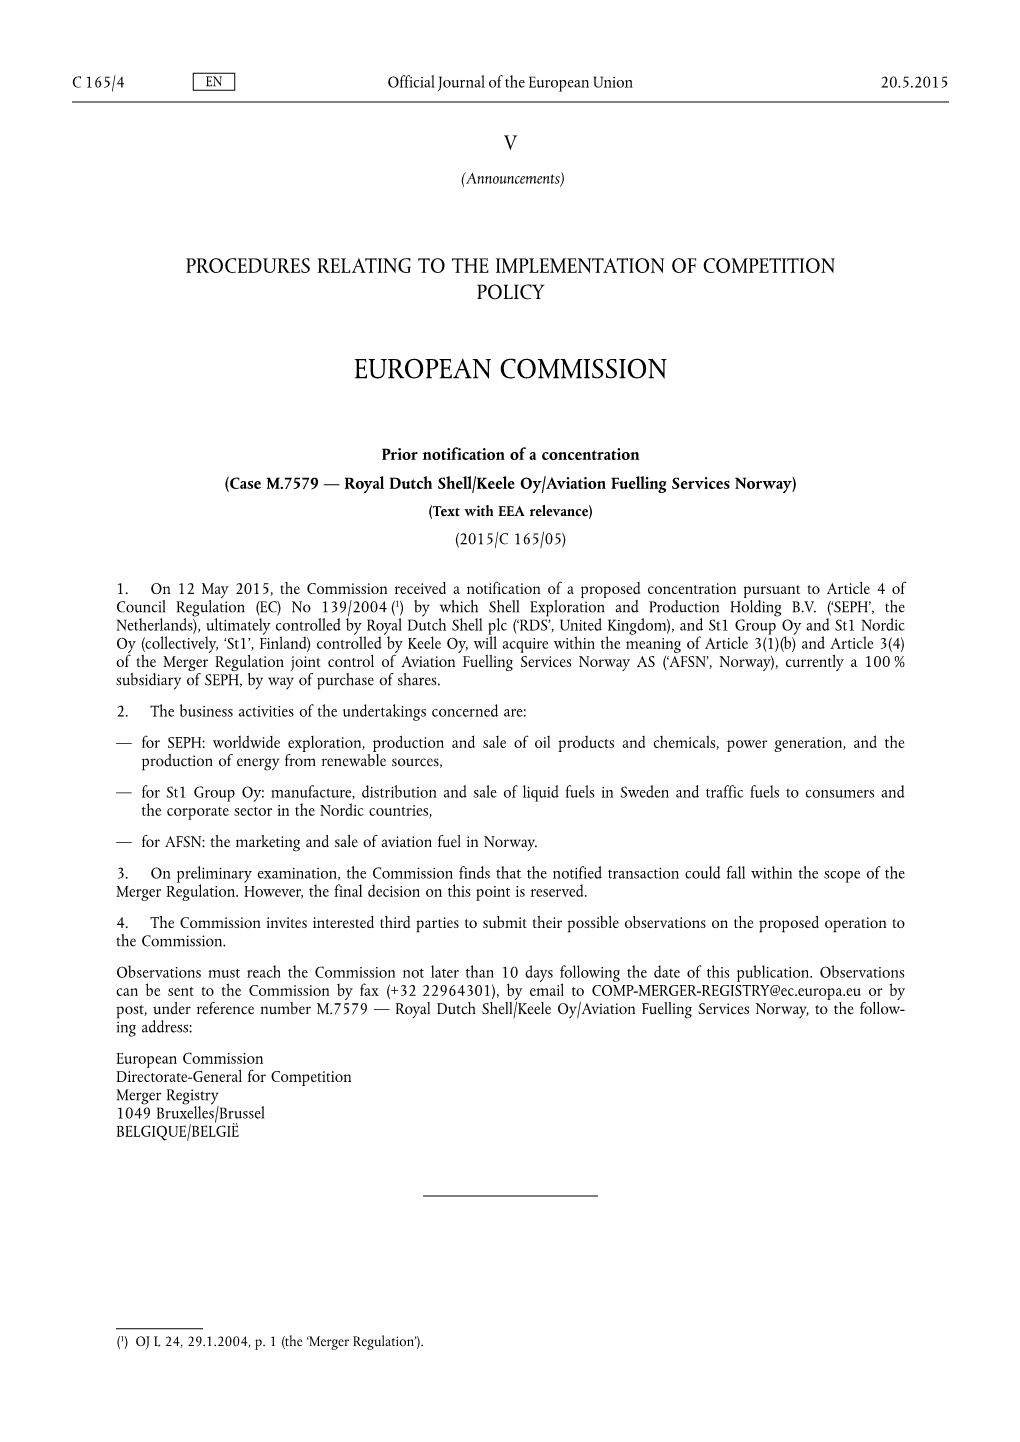 Prior Notification of a Concentration (Case M.7579 — Royal Dutch Shell/Keele Oy/Aviation Fuelling Services Norway) (Text with EEA Relevance) (2015/C 165/05)